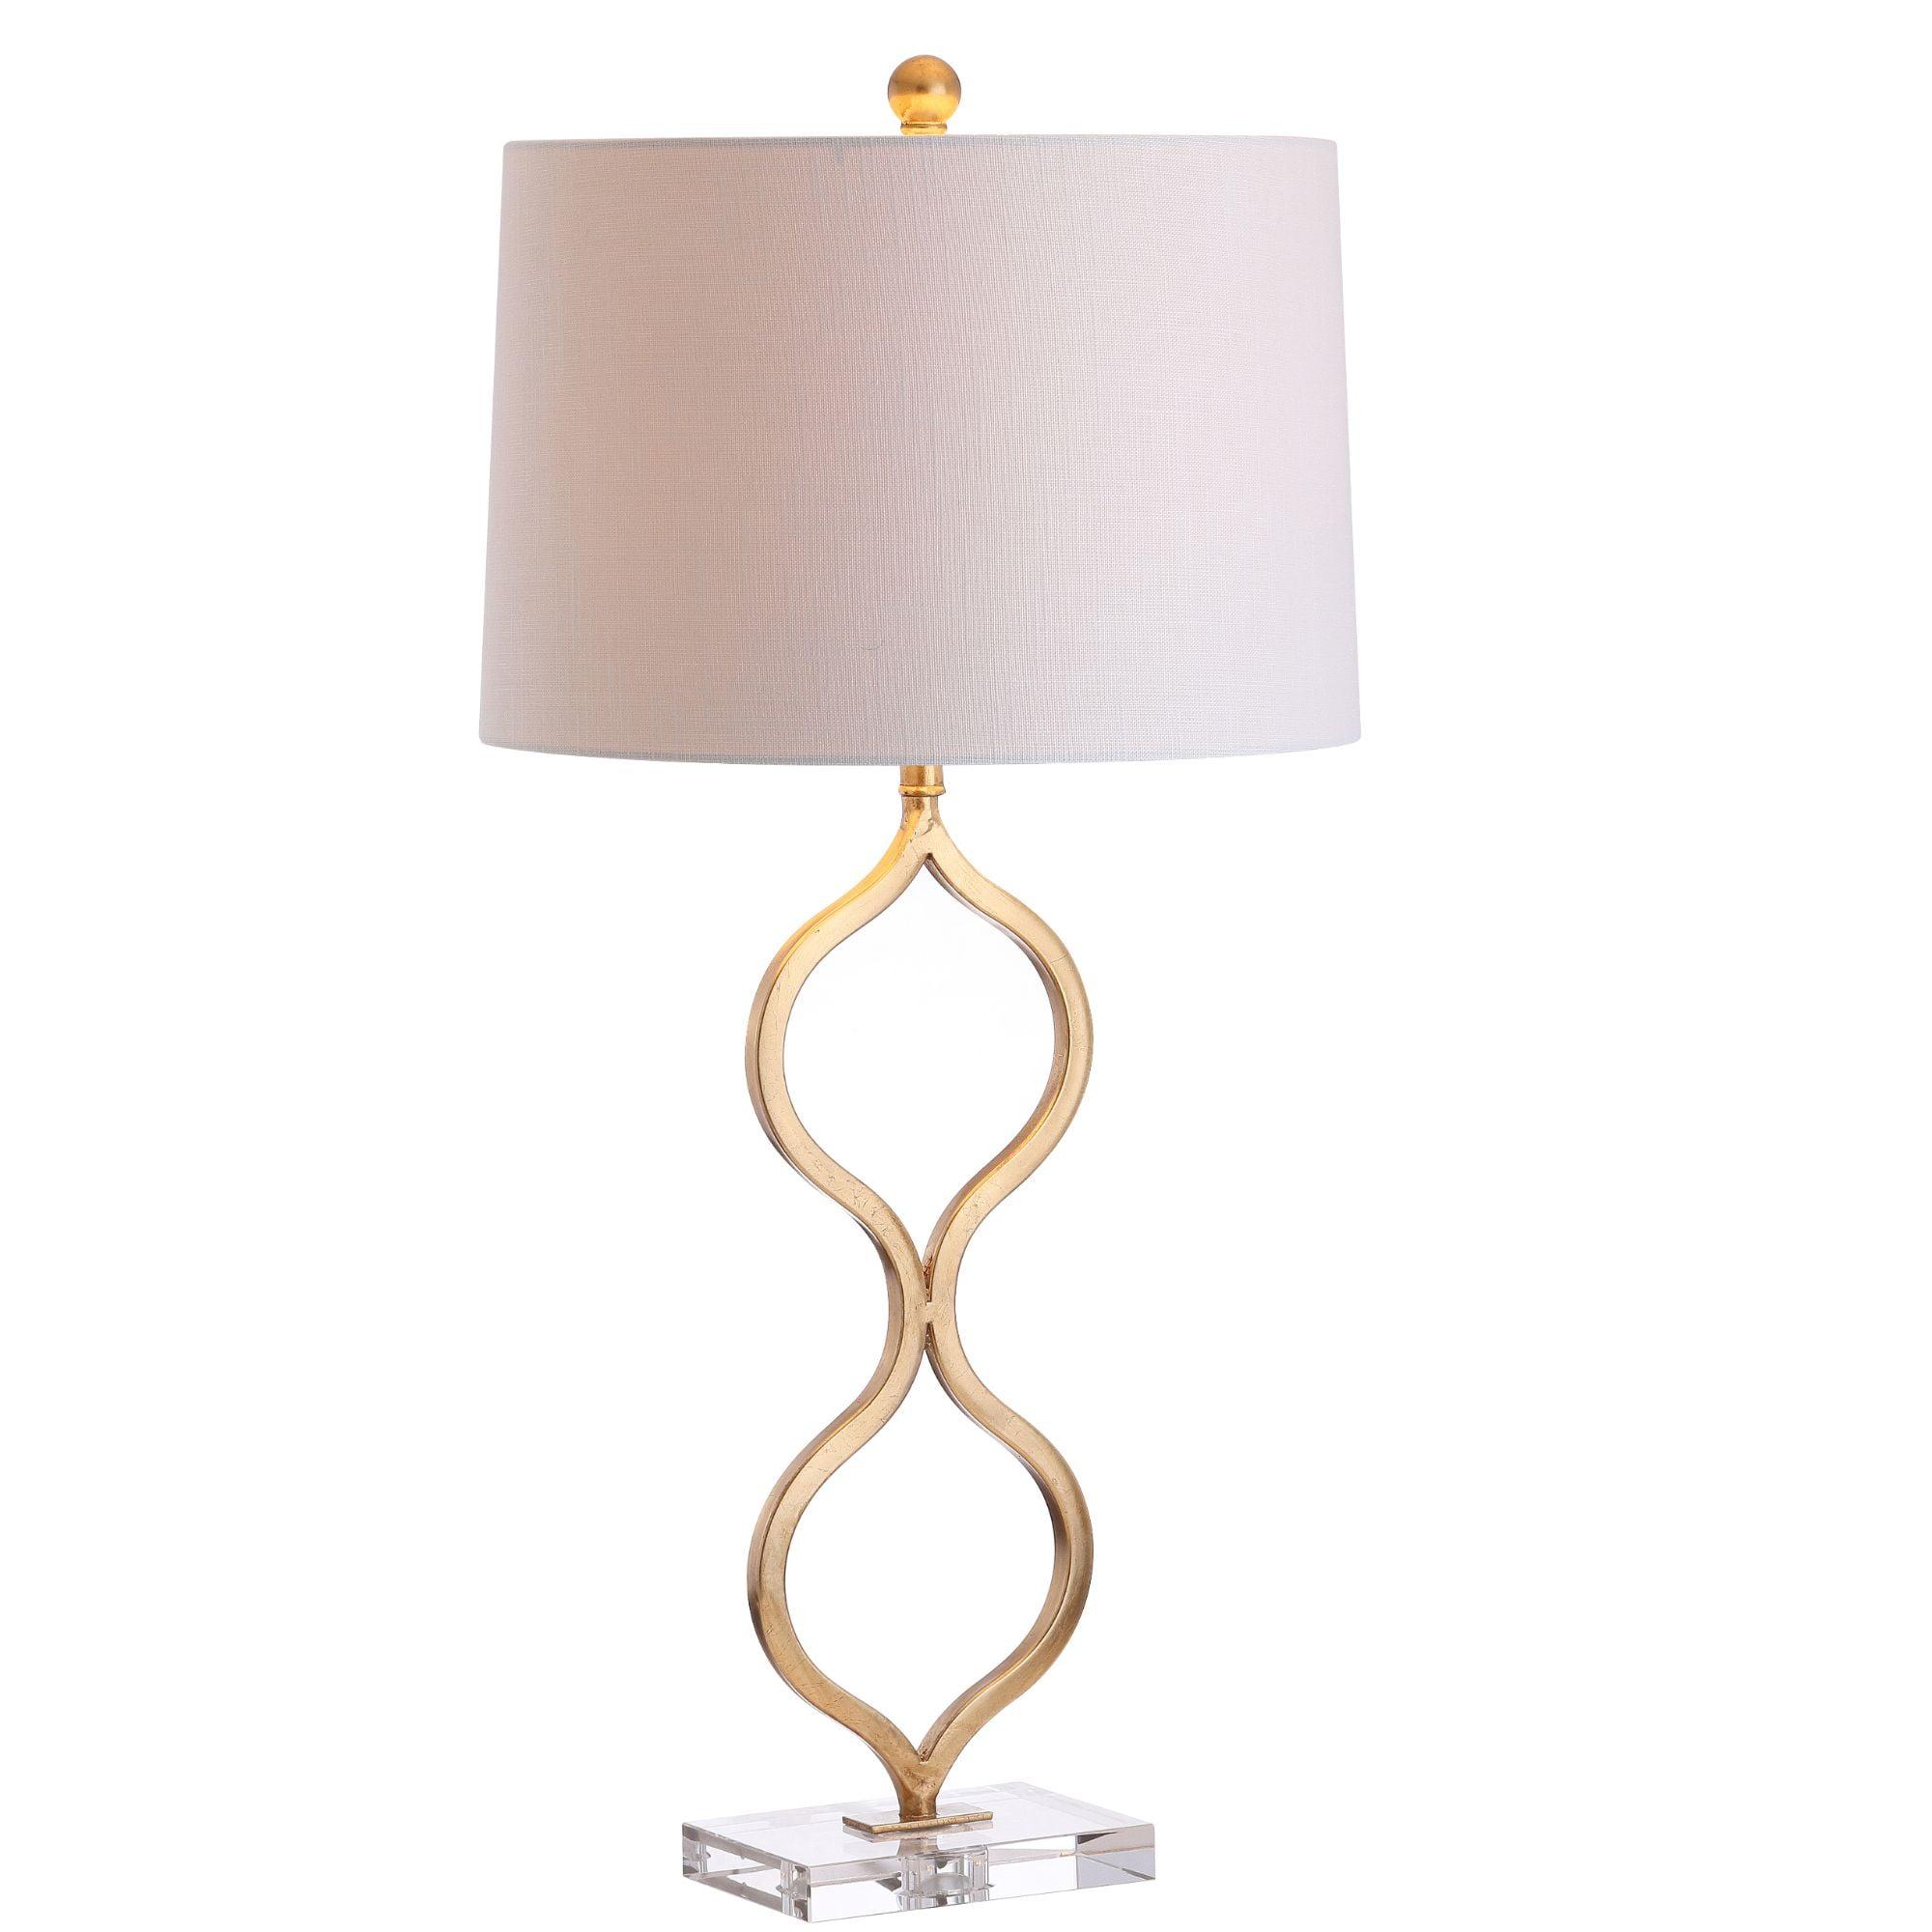 Elegant Gold Leaf 31.5" Table Lamp with White Linen Shade